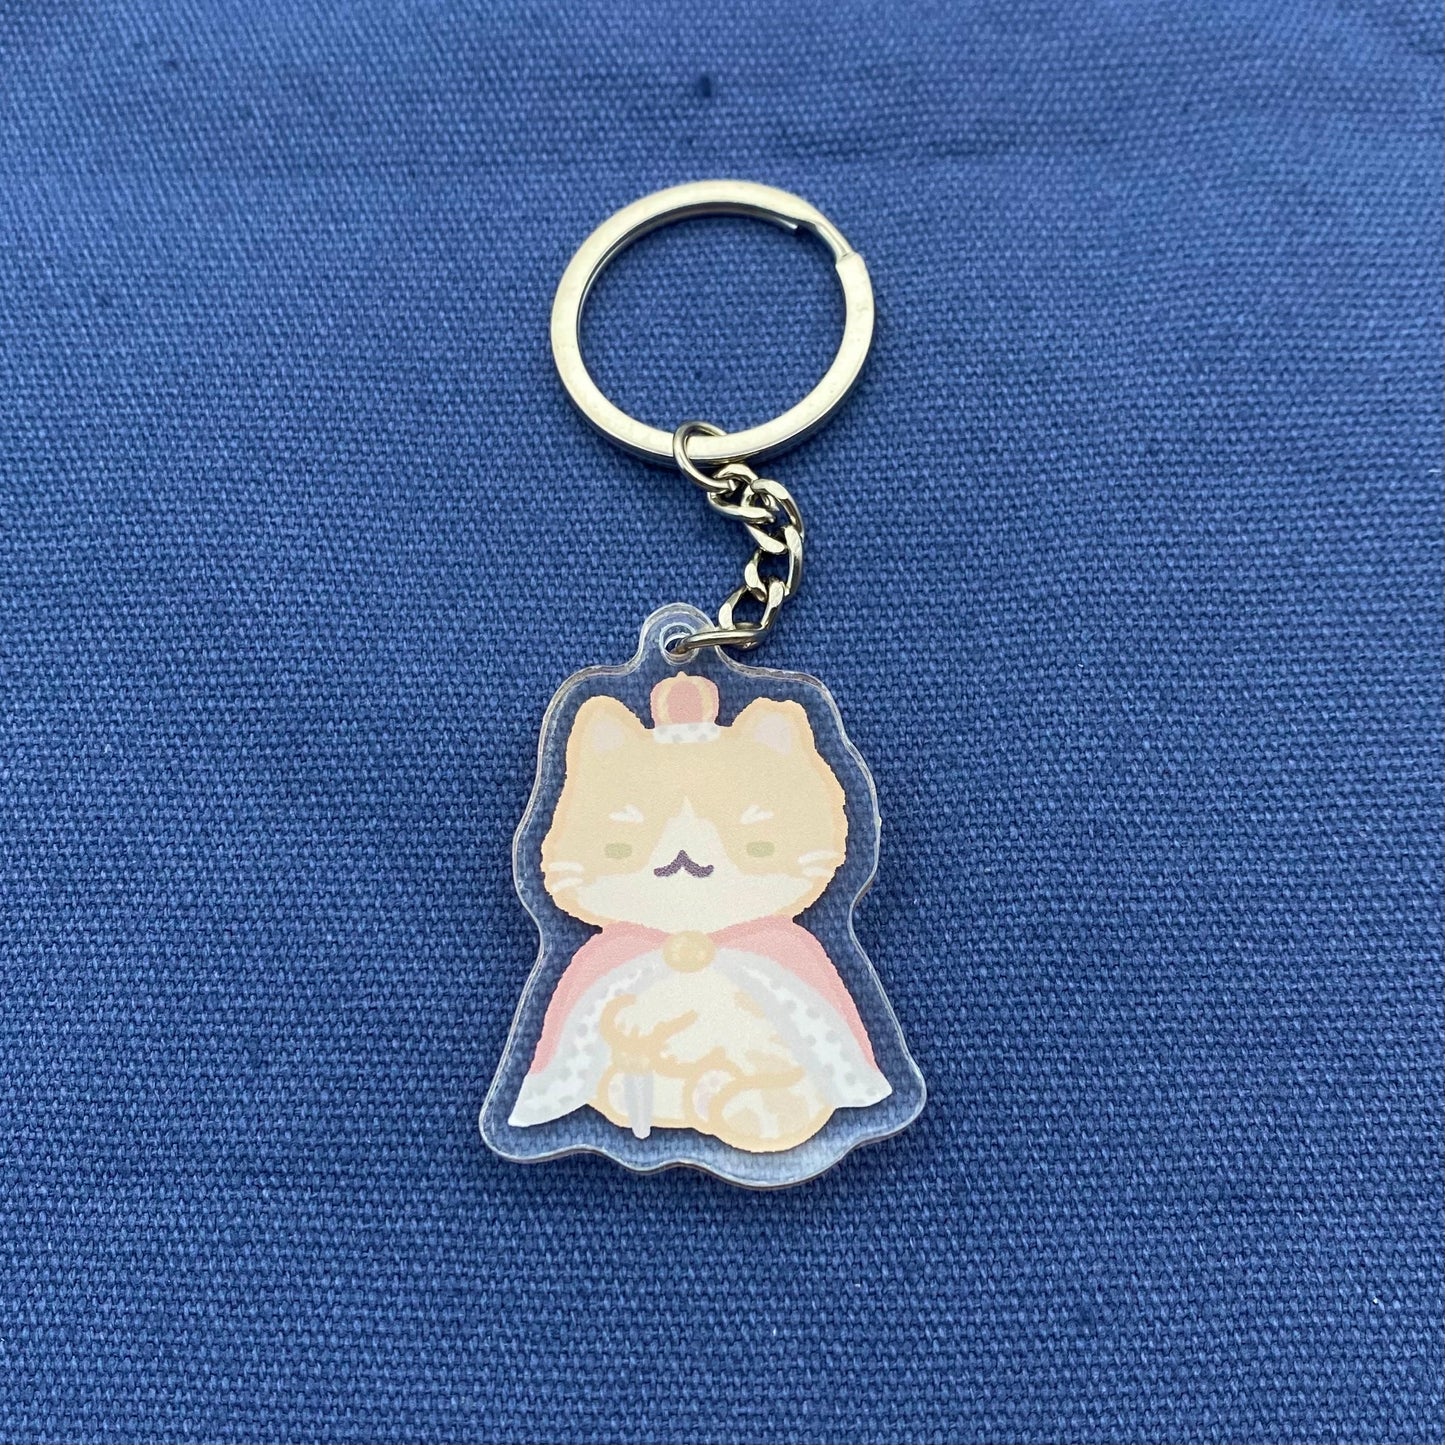 Cookie & King Keychains